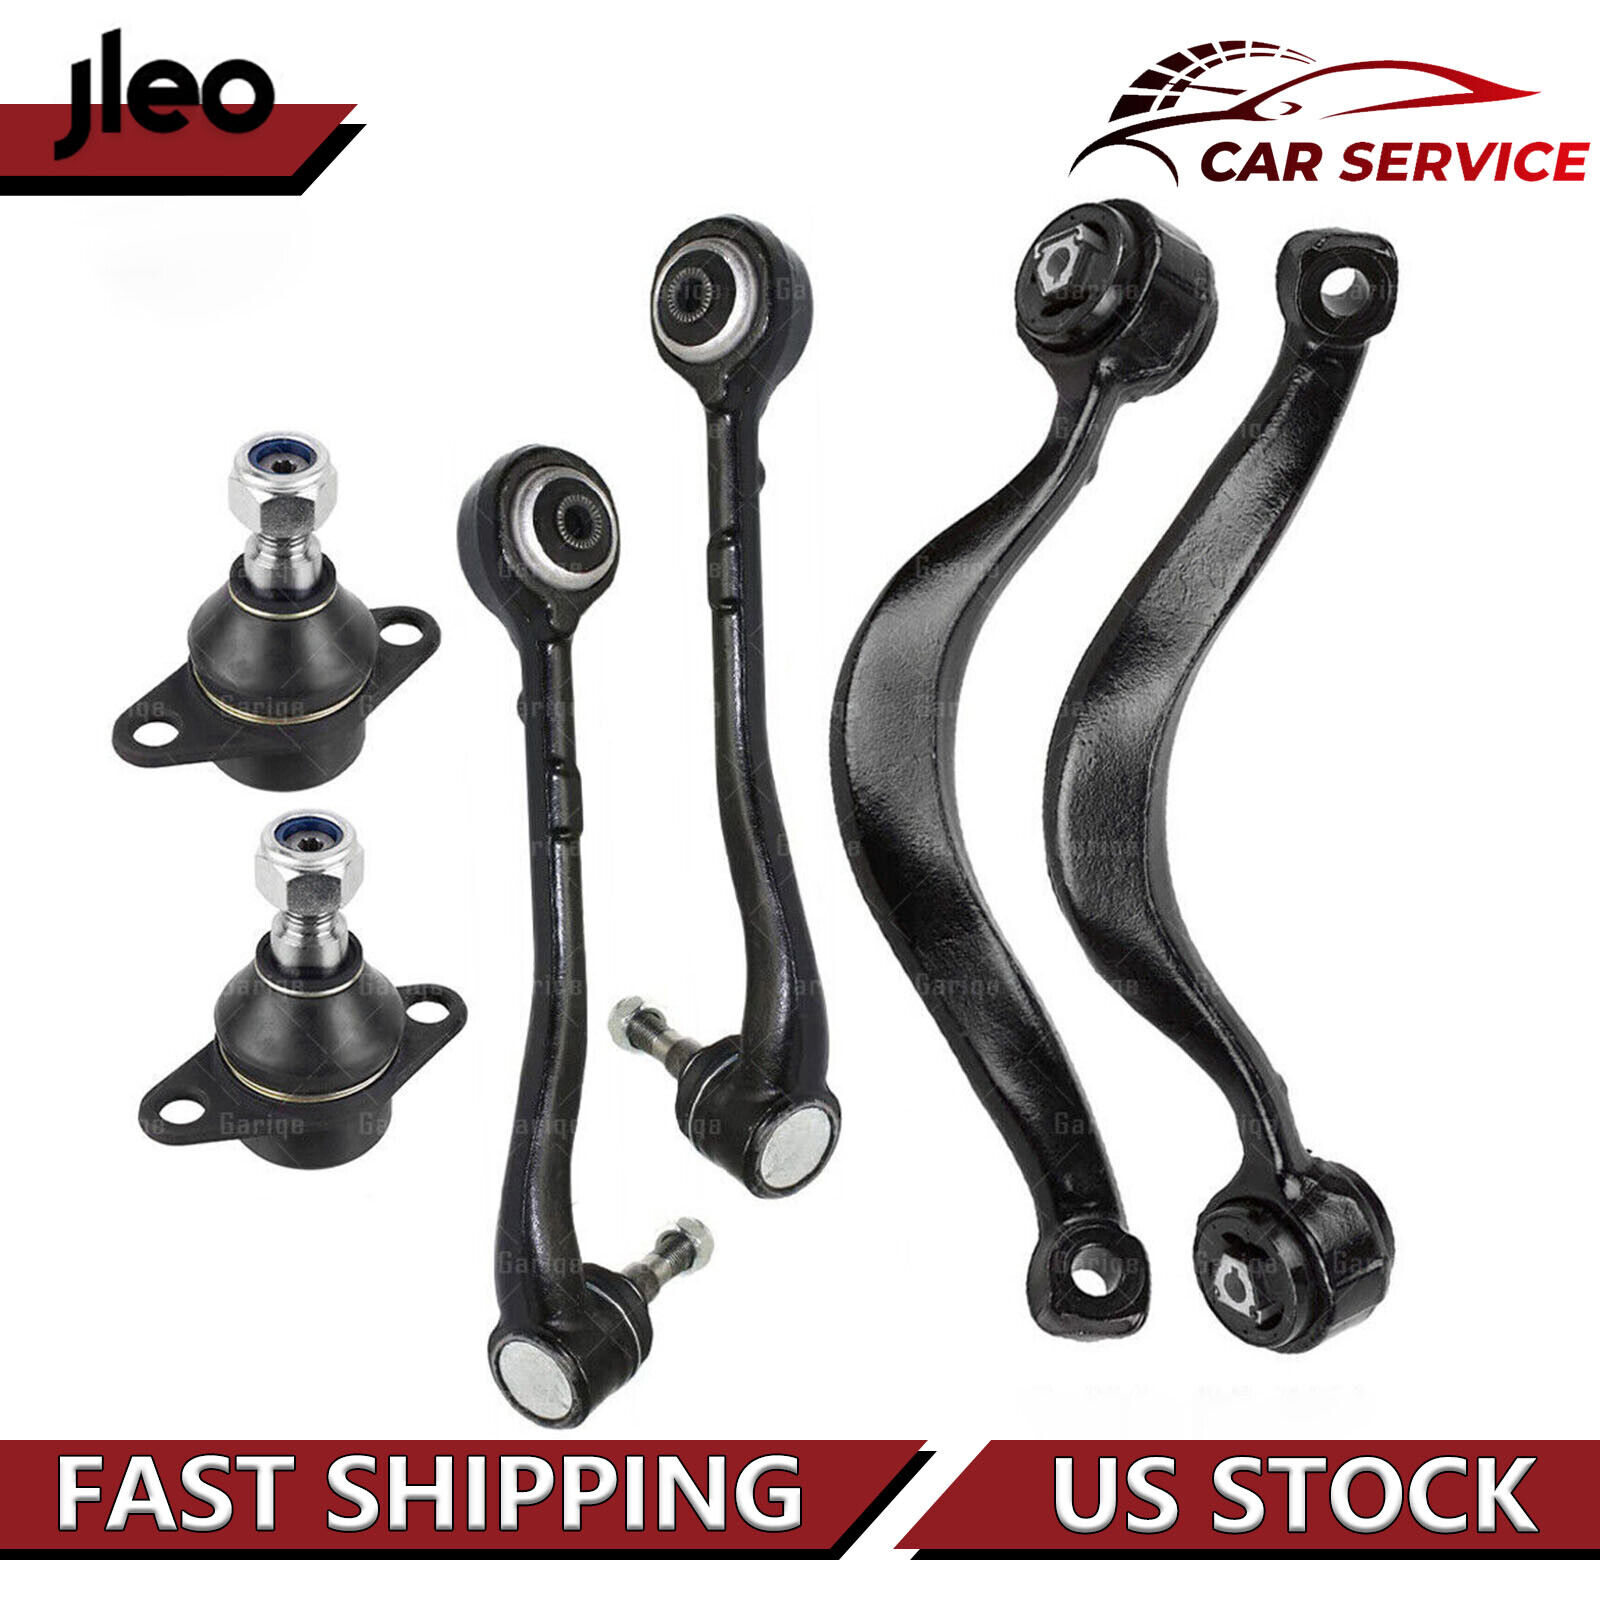 6x Front Lower Control Arm Ball Joint Suspension Kit for BMW 325xi 328i 328xi X1